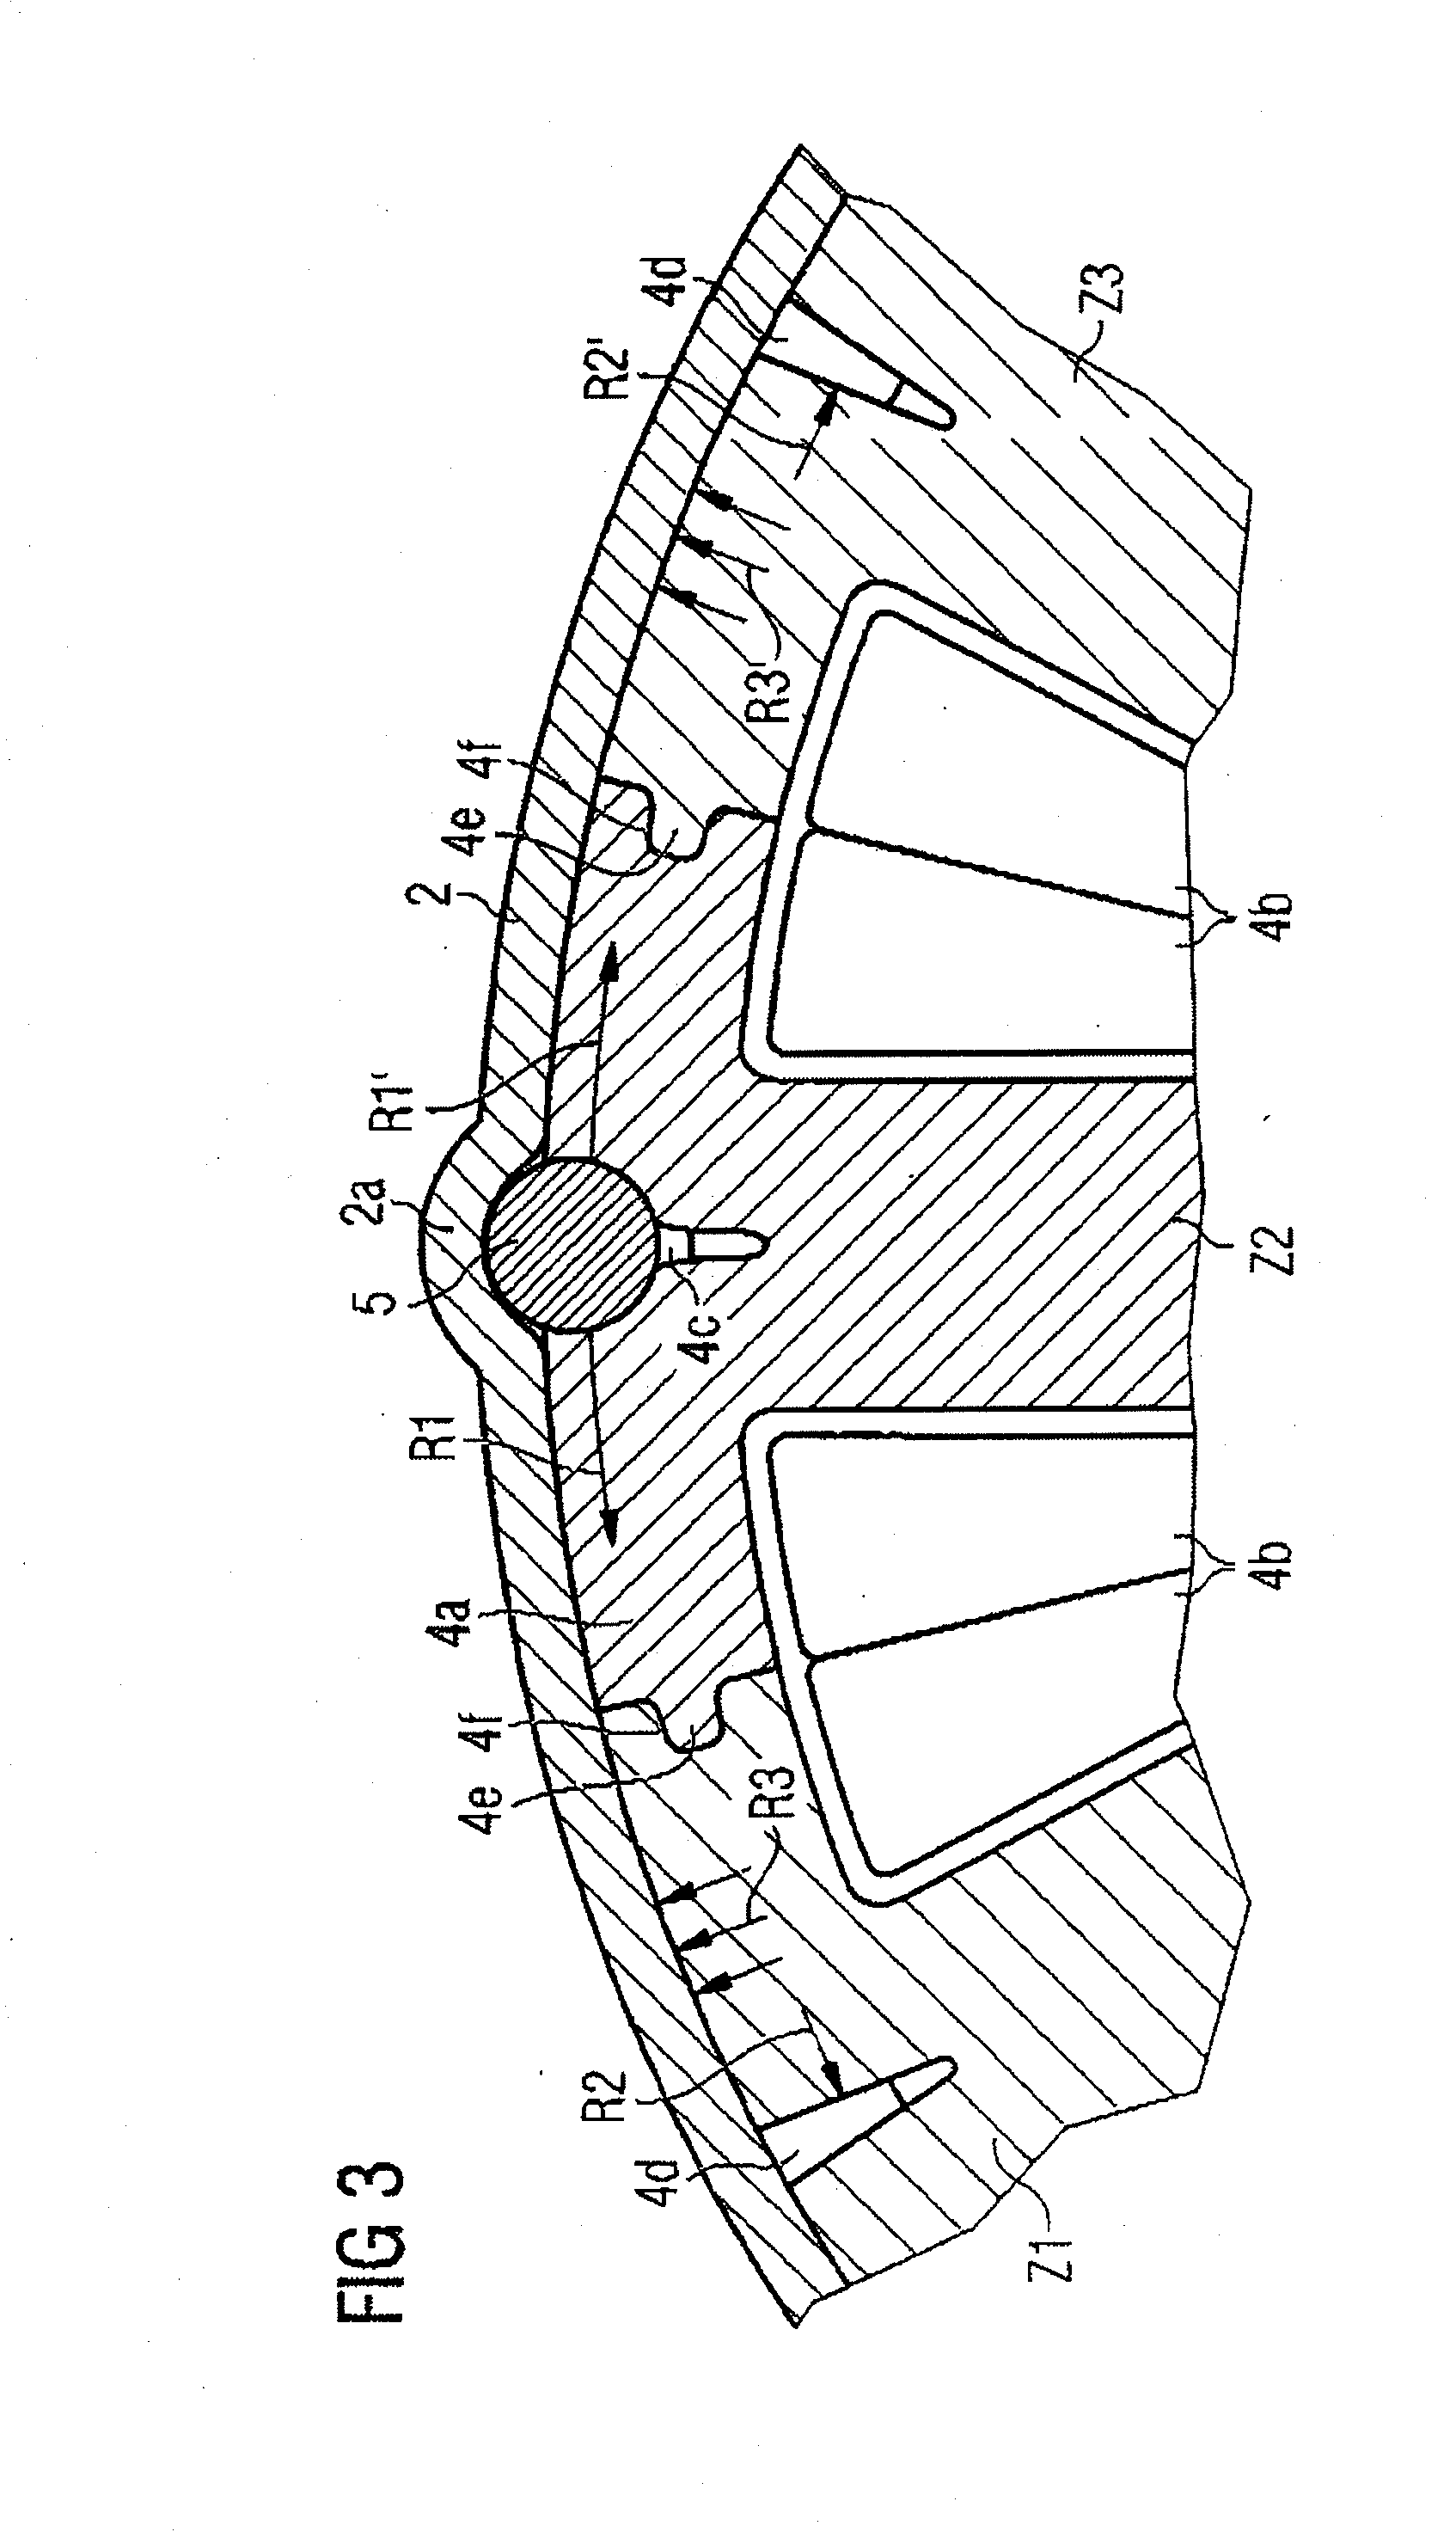 Electric Motor and Method for Manufacturing an Electric Motor for a Motor Vehicle Actuator Drive